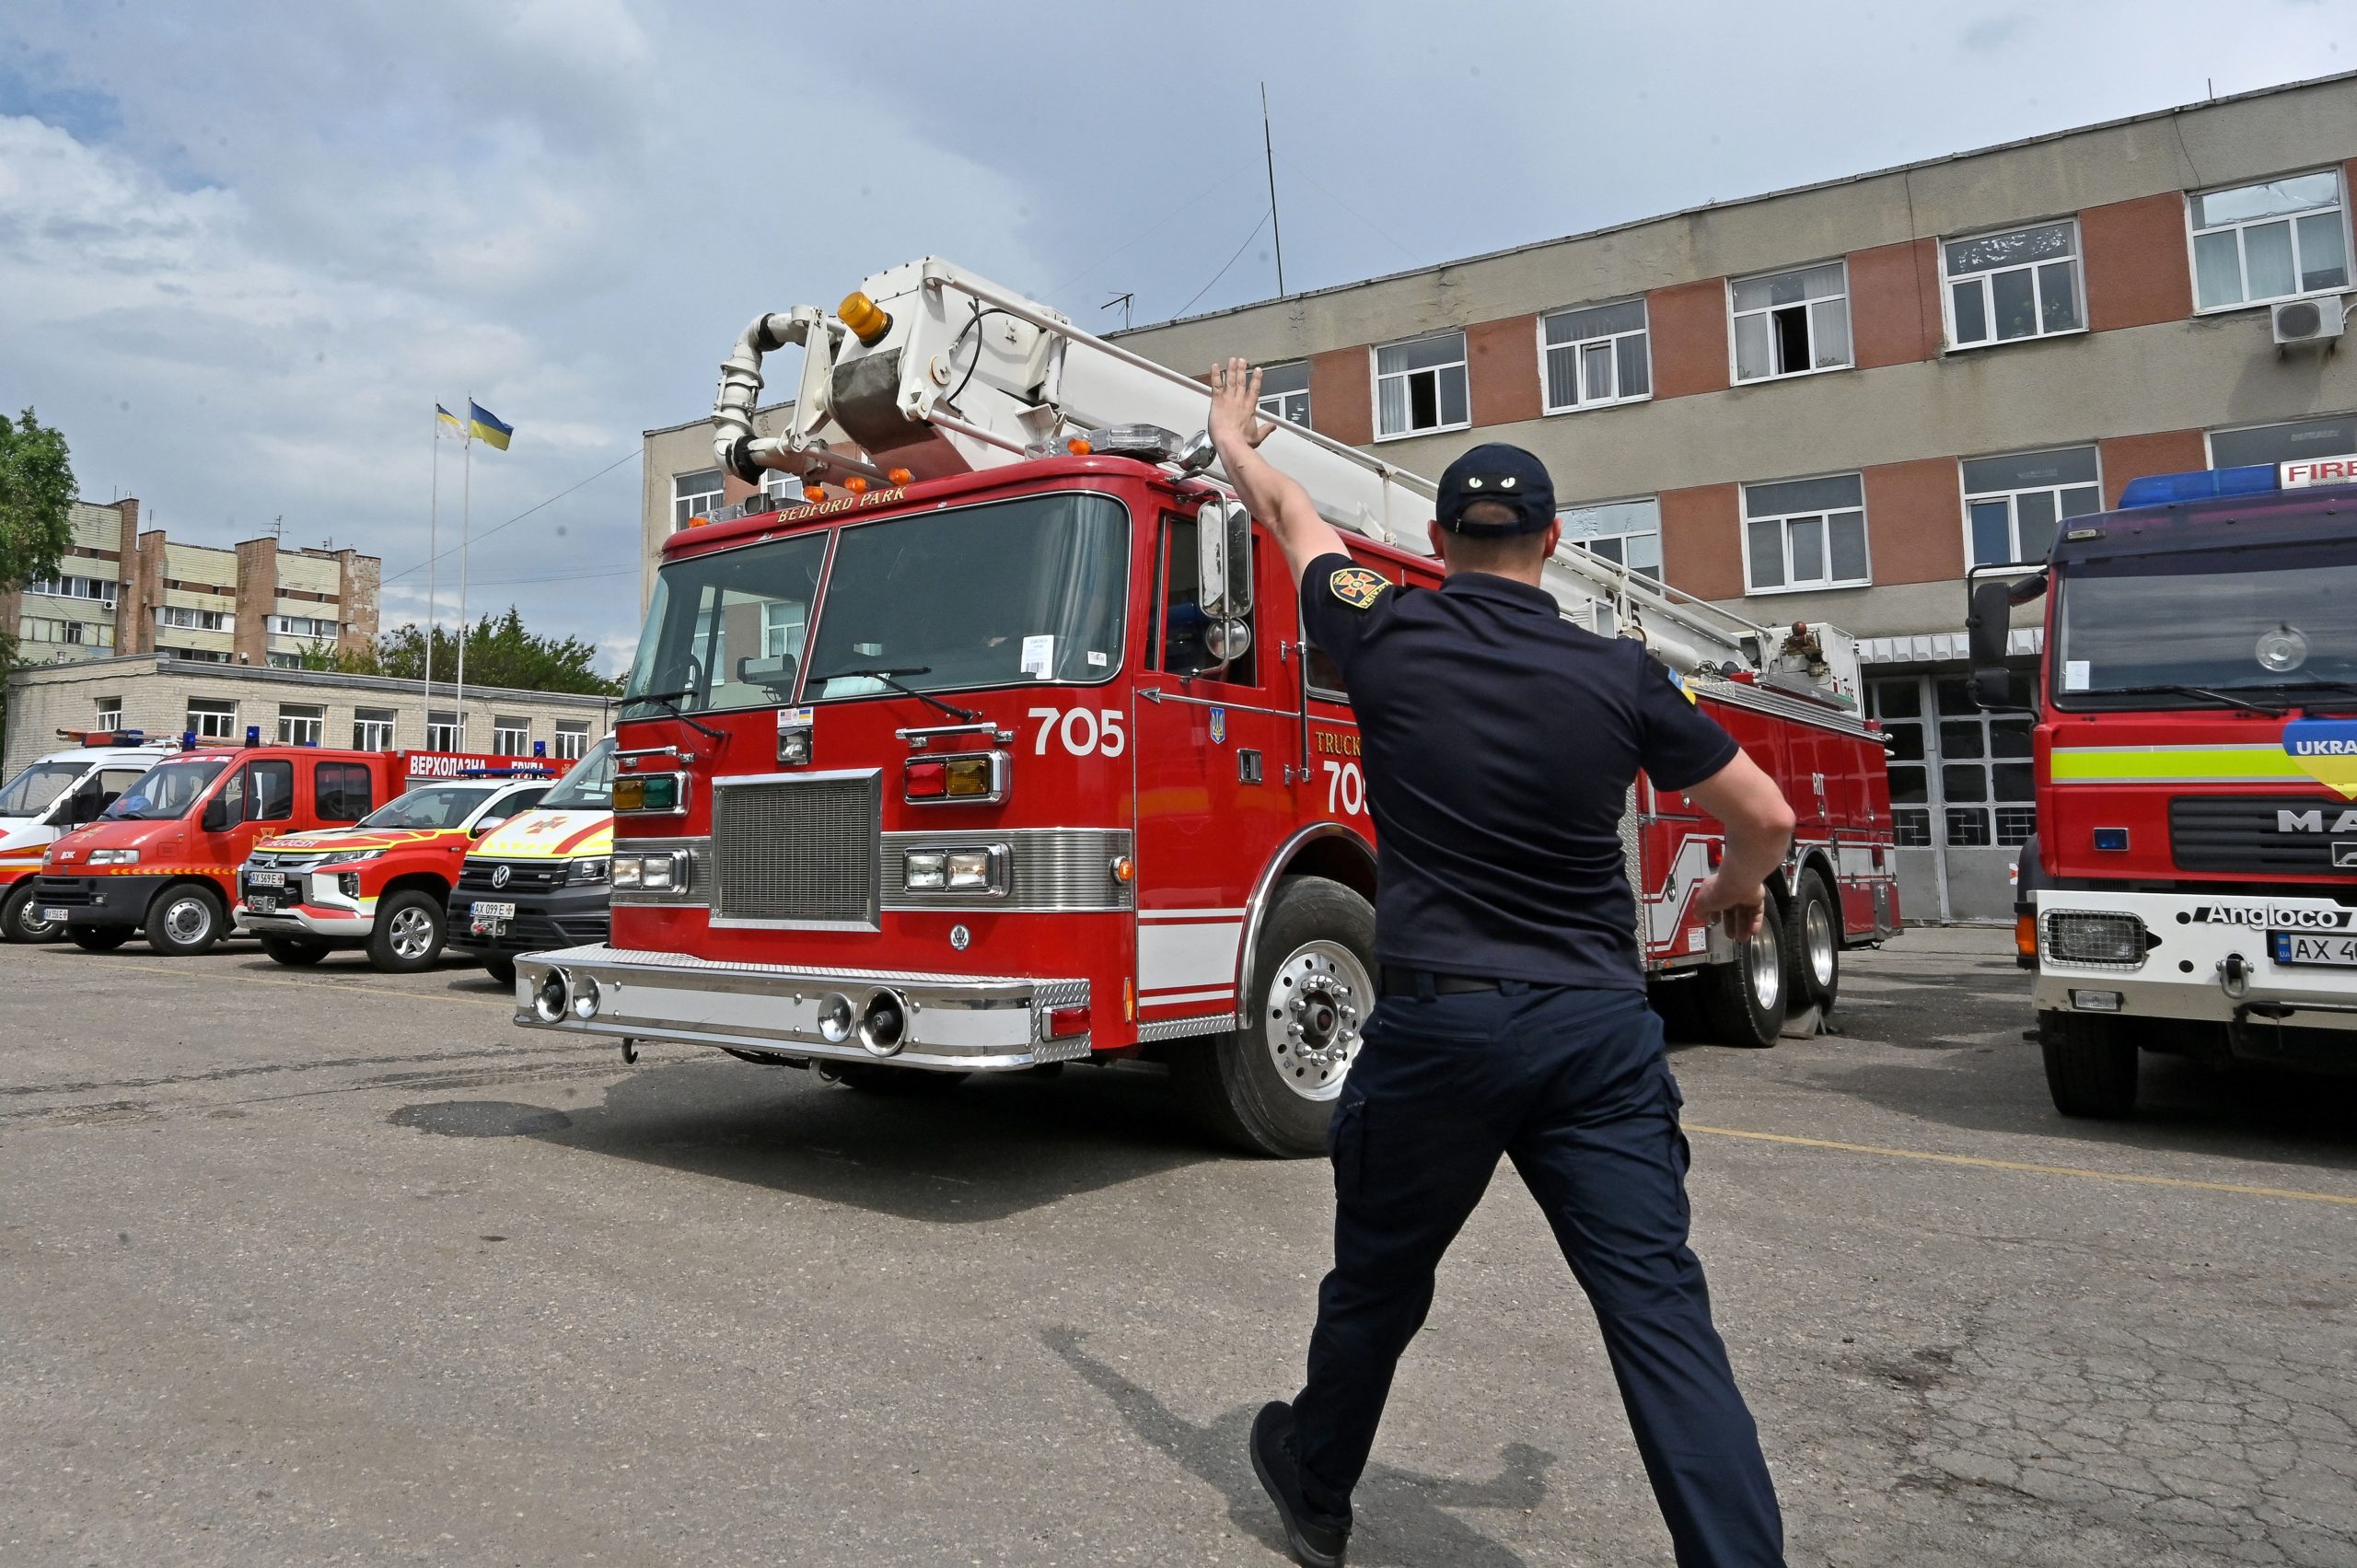 An emergency responder gestures as Kharkiv rescuers inspect and test two fire trucks received as aid from United States fire departments, in Kharkiv, on May 25, 2023, amid Russia's military invasion on Ukraine. Since the beginning of the full-scale invasion, the Kharkiv garrison of the State Emergency Service lost 10 units of fire-rescue equipment, and another 53 vehicles were significantly damaged as a result of shelling. (Photo by SERGEY BOBOK/AFP via Getty Images)